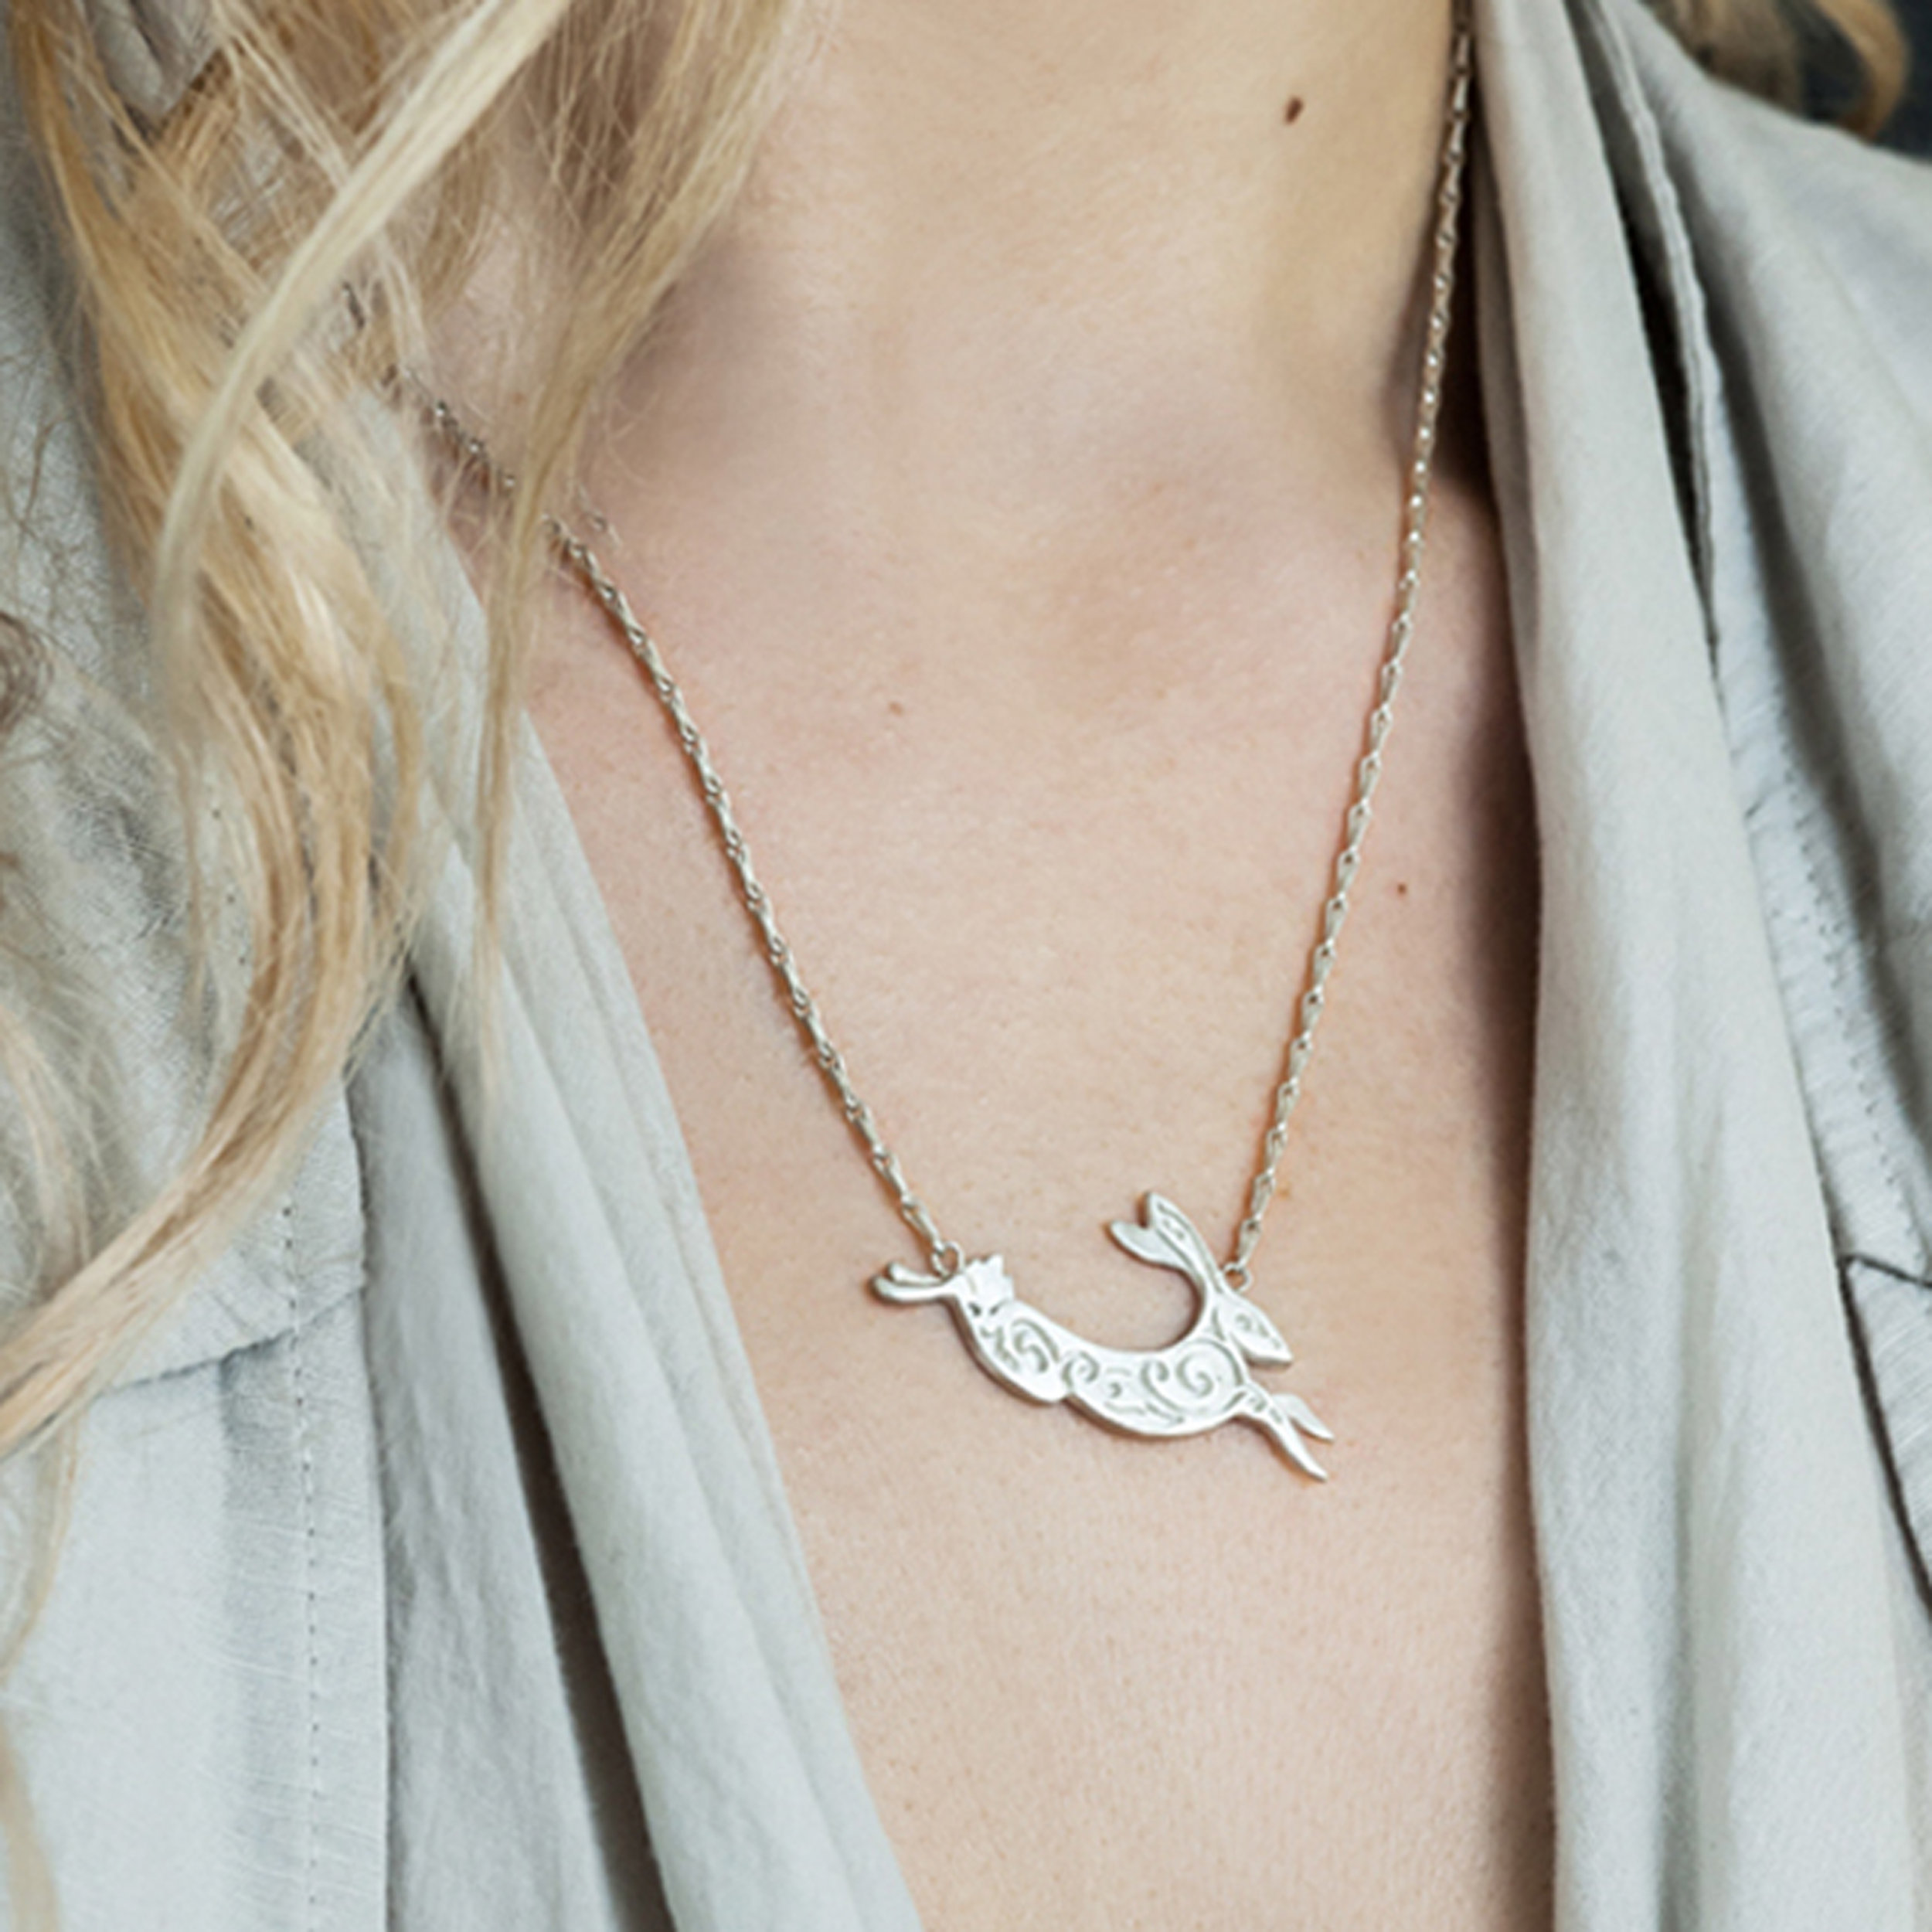 2. Small Silver Hare Necklace on model 300dpi